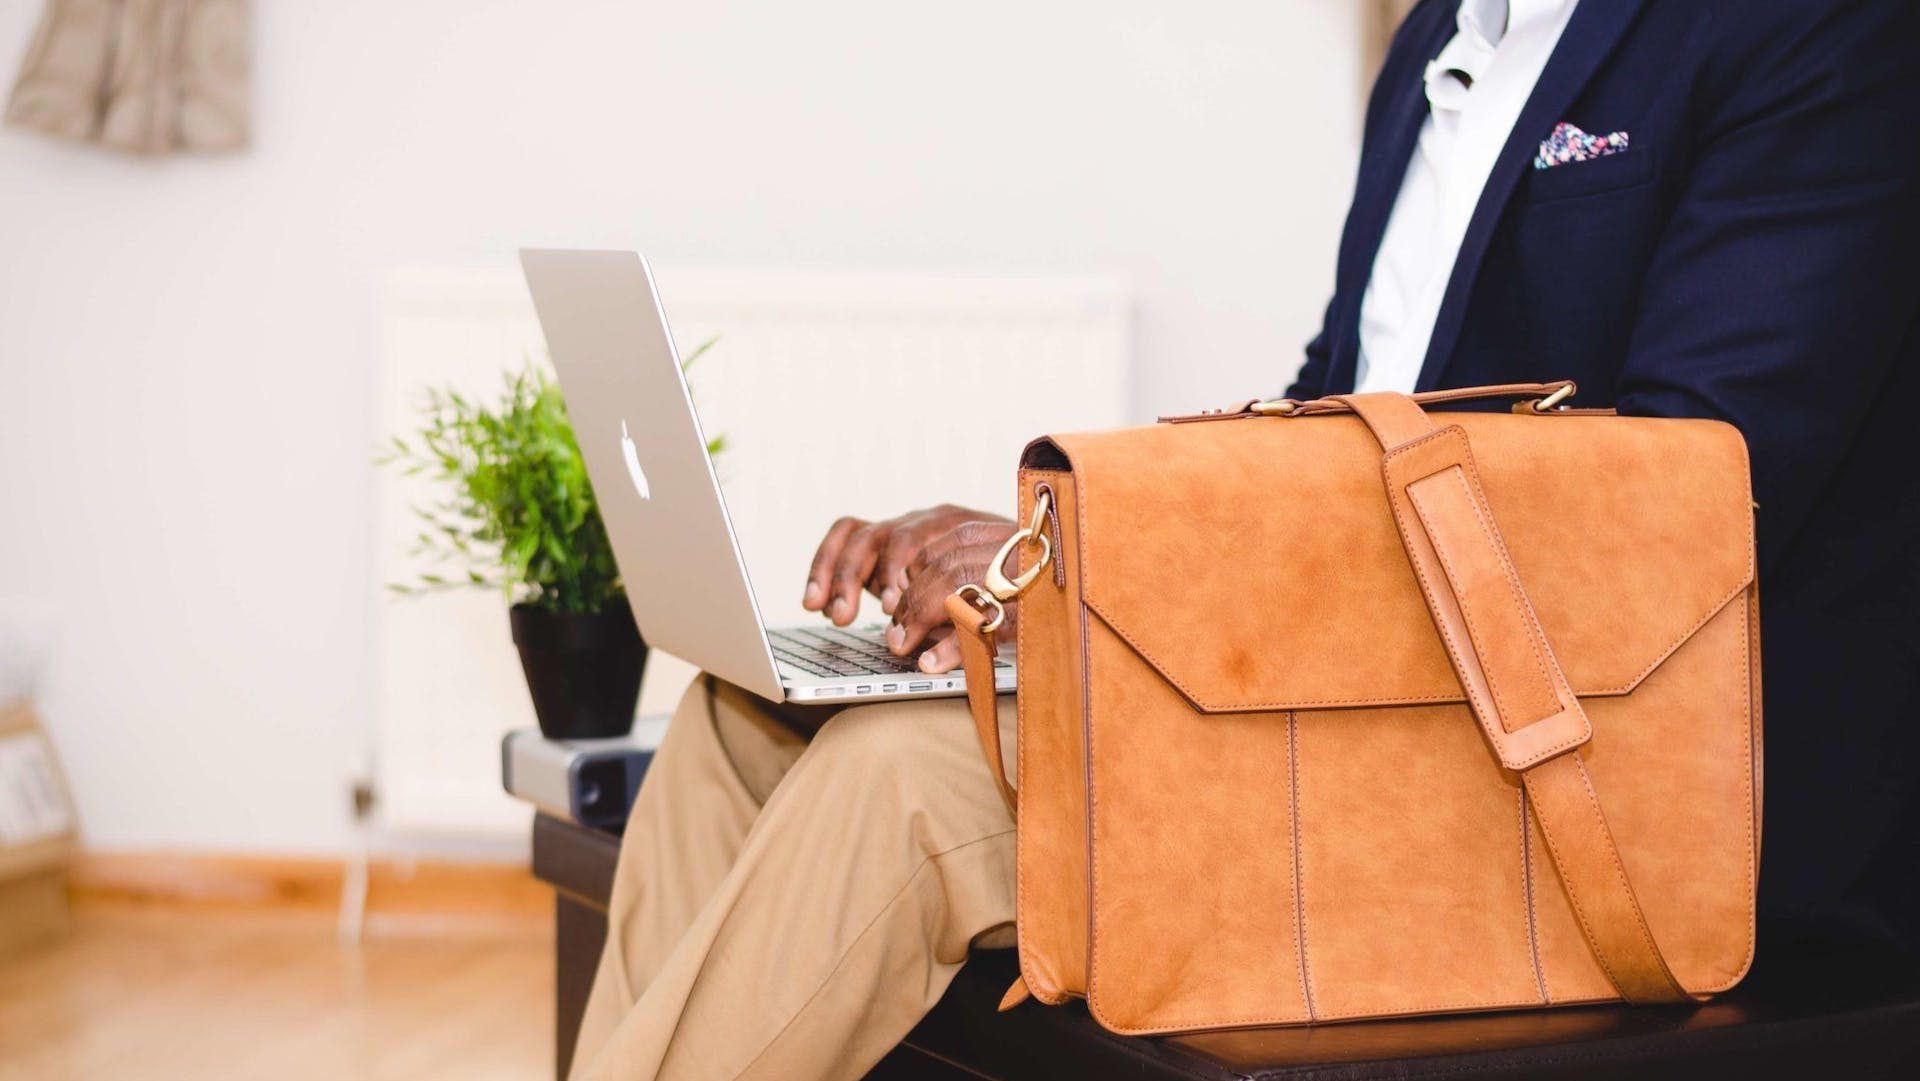 Person Wearing Blue Suit Beside Crossbody Bag and Using Macbook